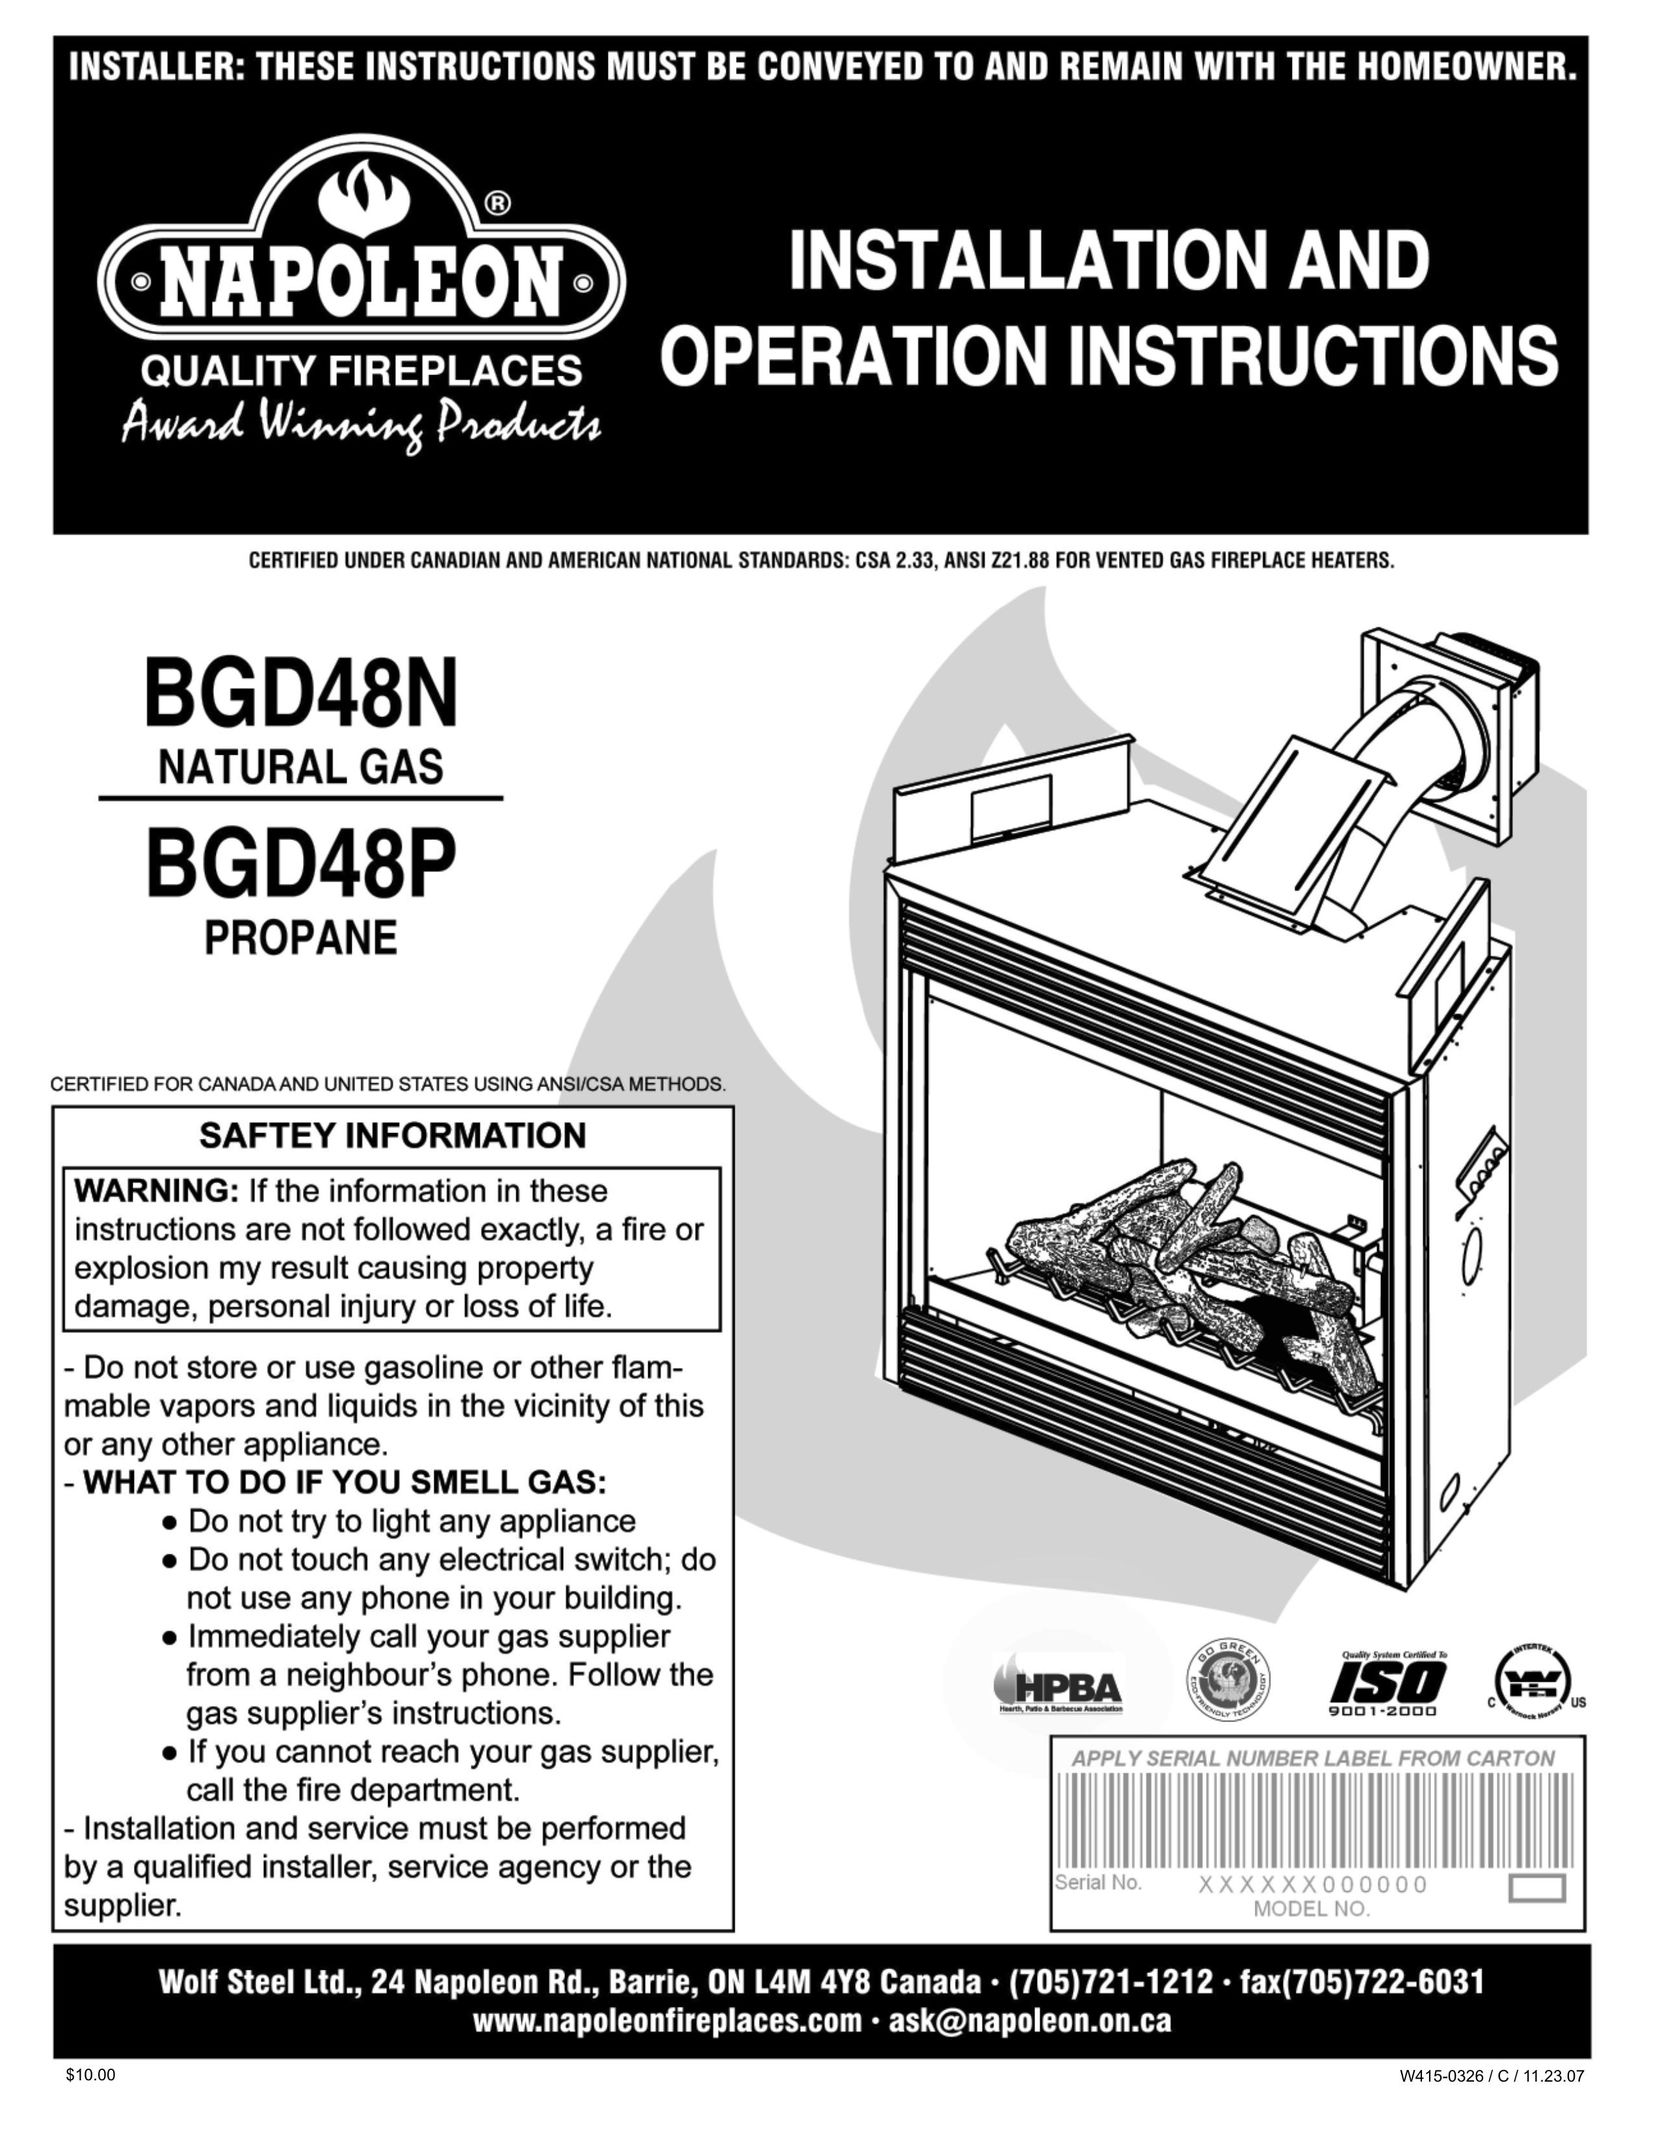 Napoleon Fireplaces BGD48N Indoor Fireplace User Manual